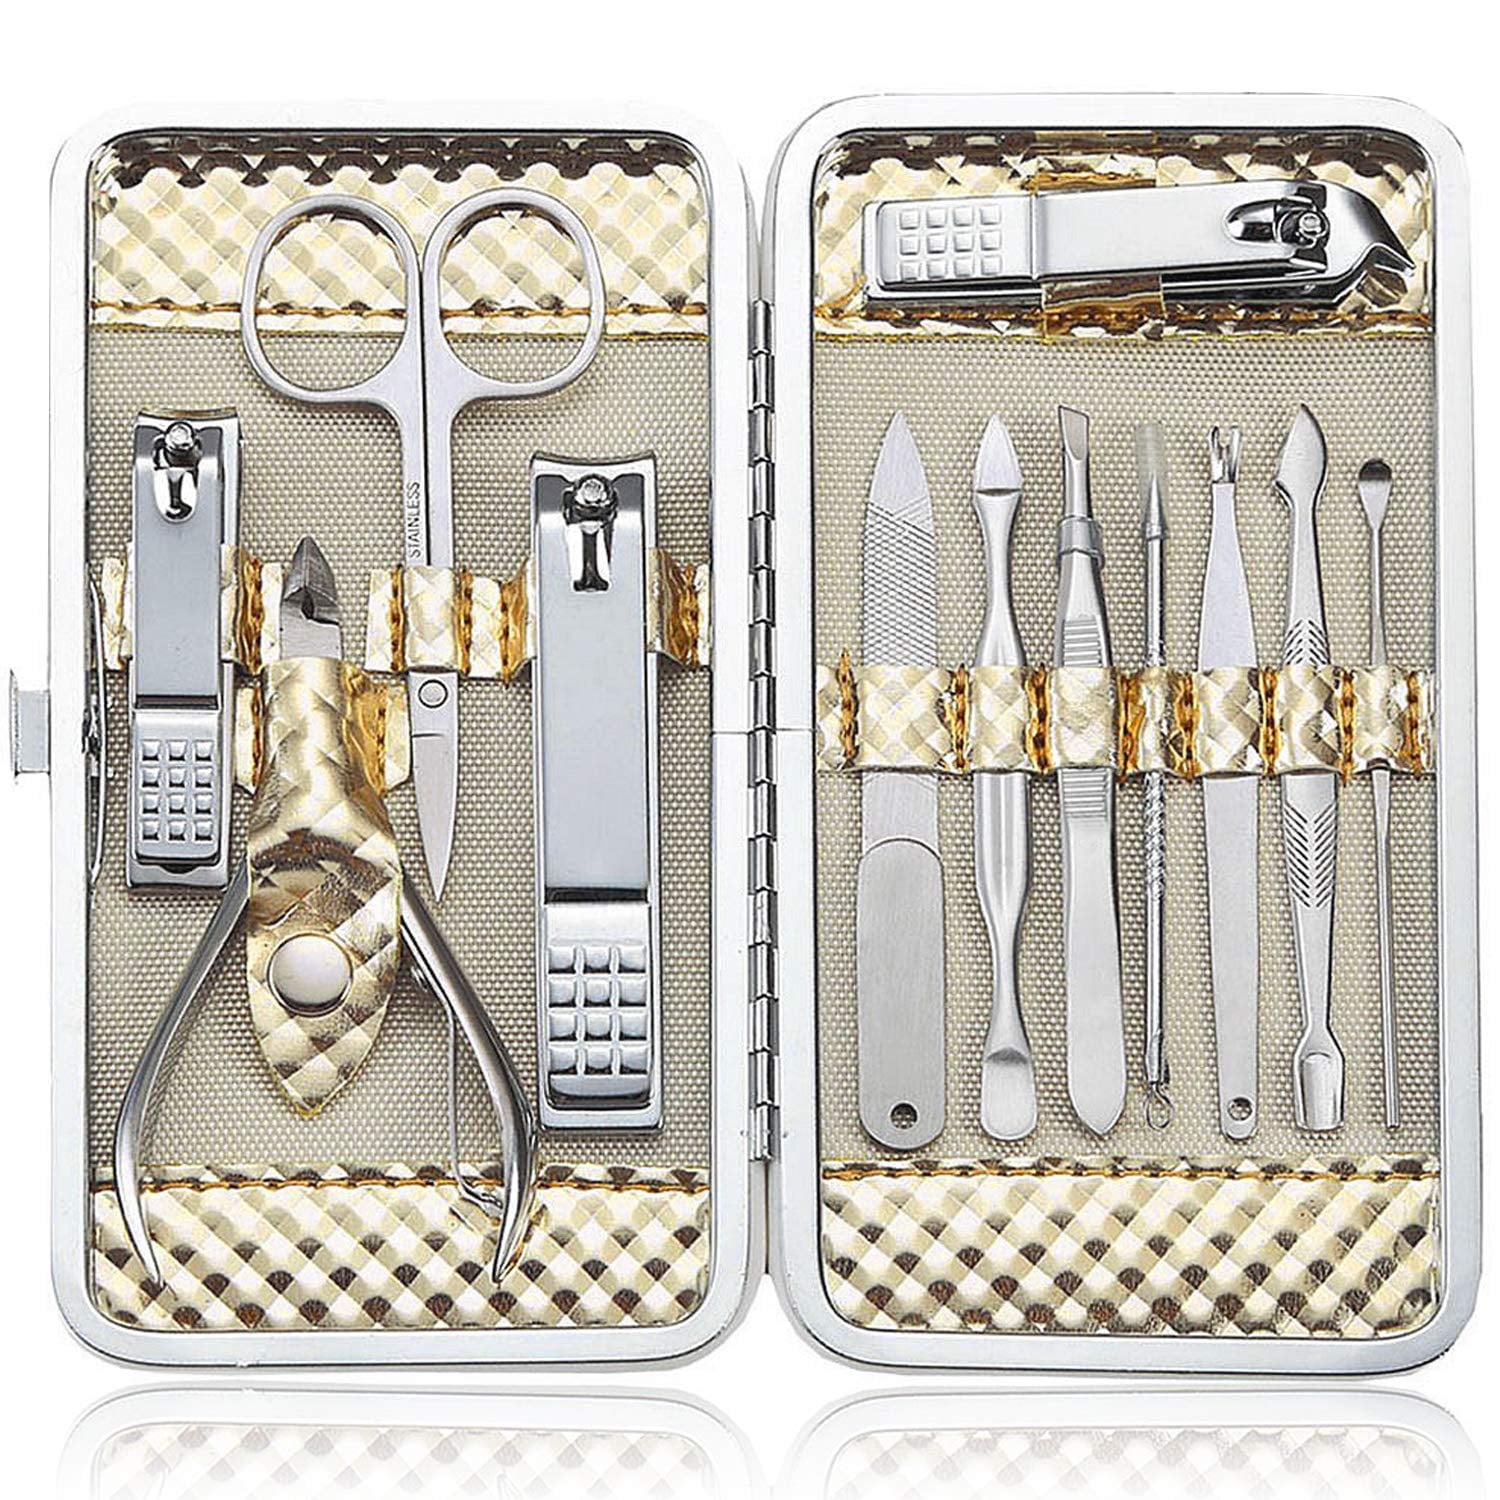  Harperton Cuticle Trimmer - Full Jaw Nipper and Trimmer,  Non-Slip Cuticle Nipper Stainless Steel Cutter Fingernails and Toenails :  Beauty & Personal Care